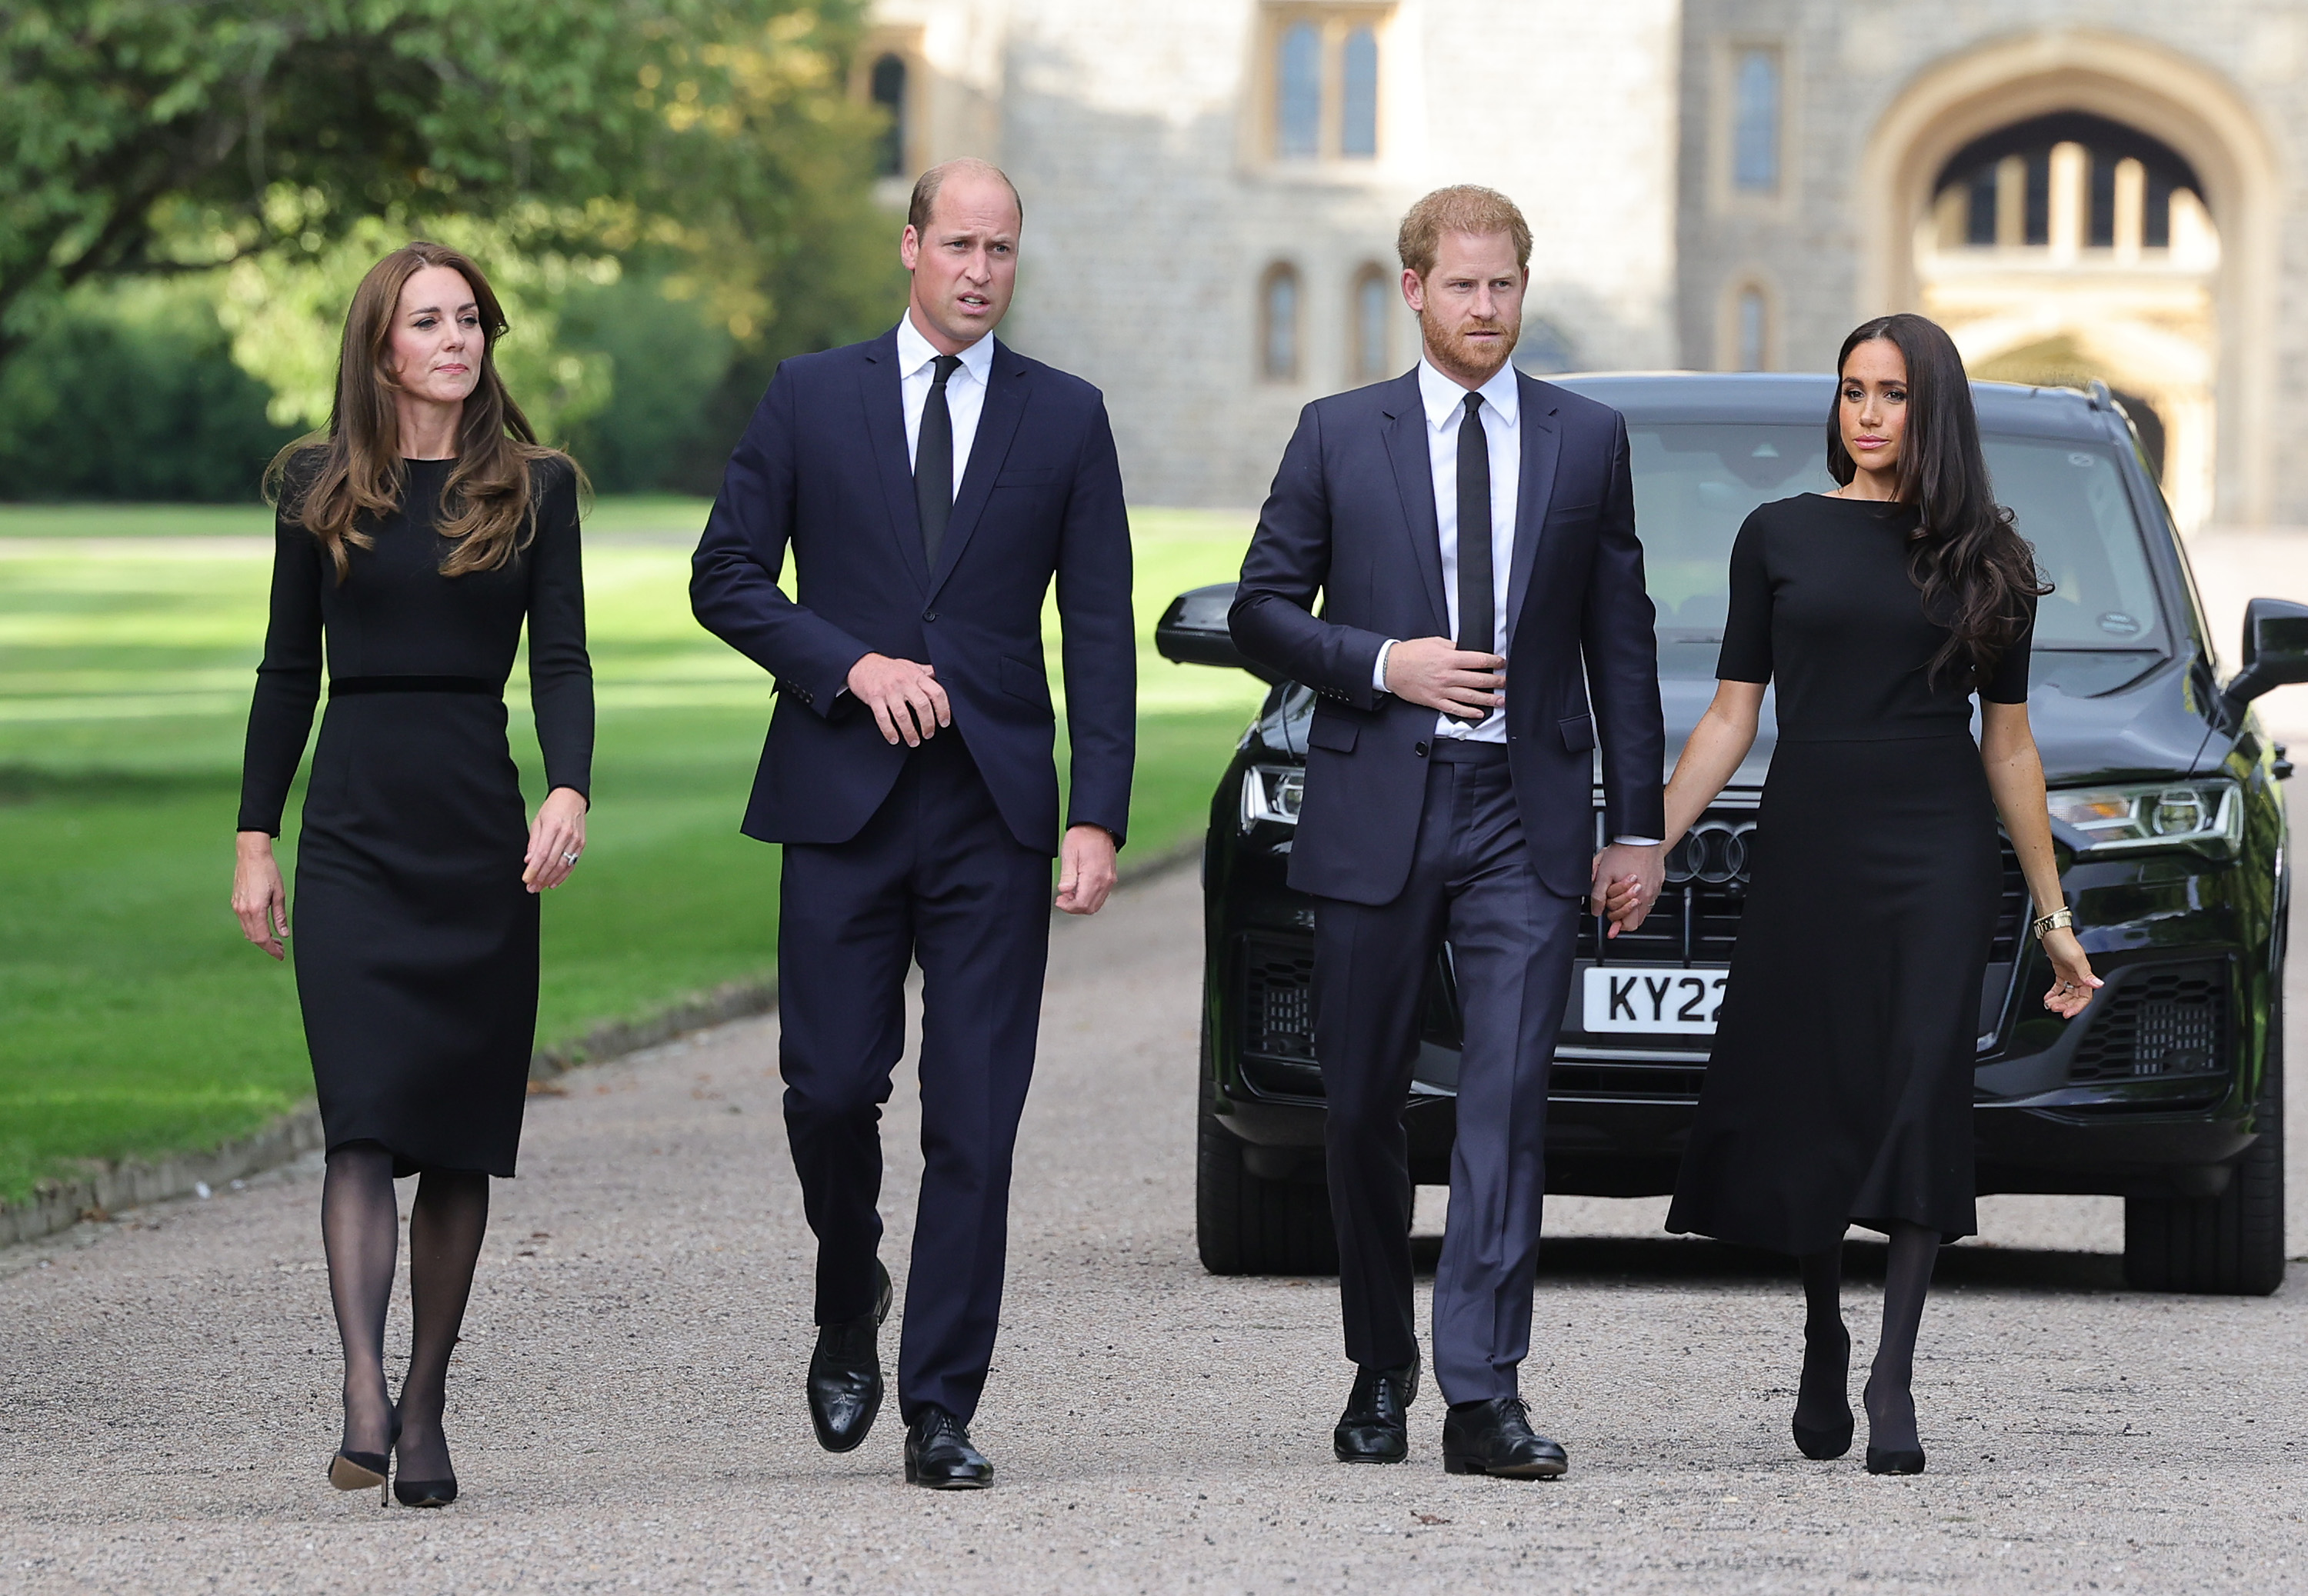 Princess Catherine, Princes William and Harry, and Meghan Markle on a walk at Windsor Castle on September 10, 2022 | Source: Getty Images